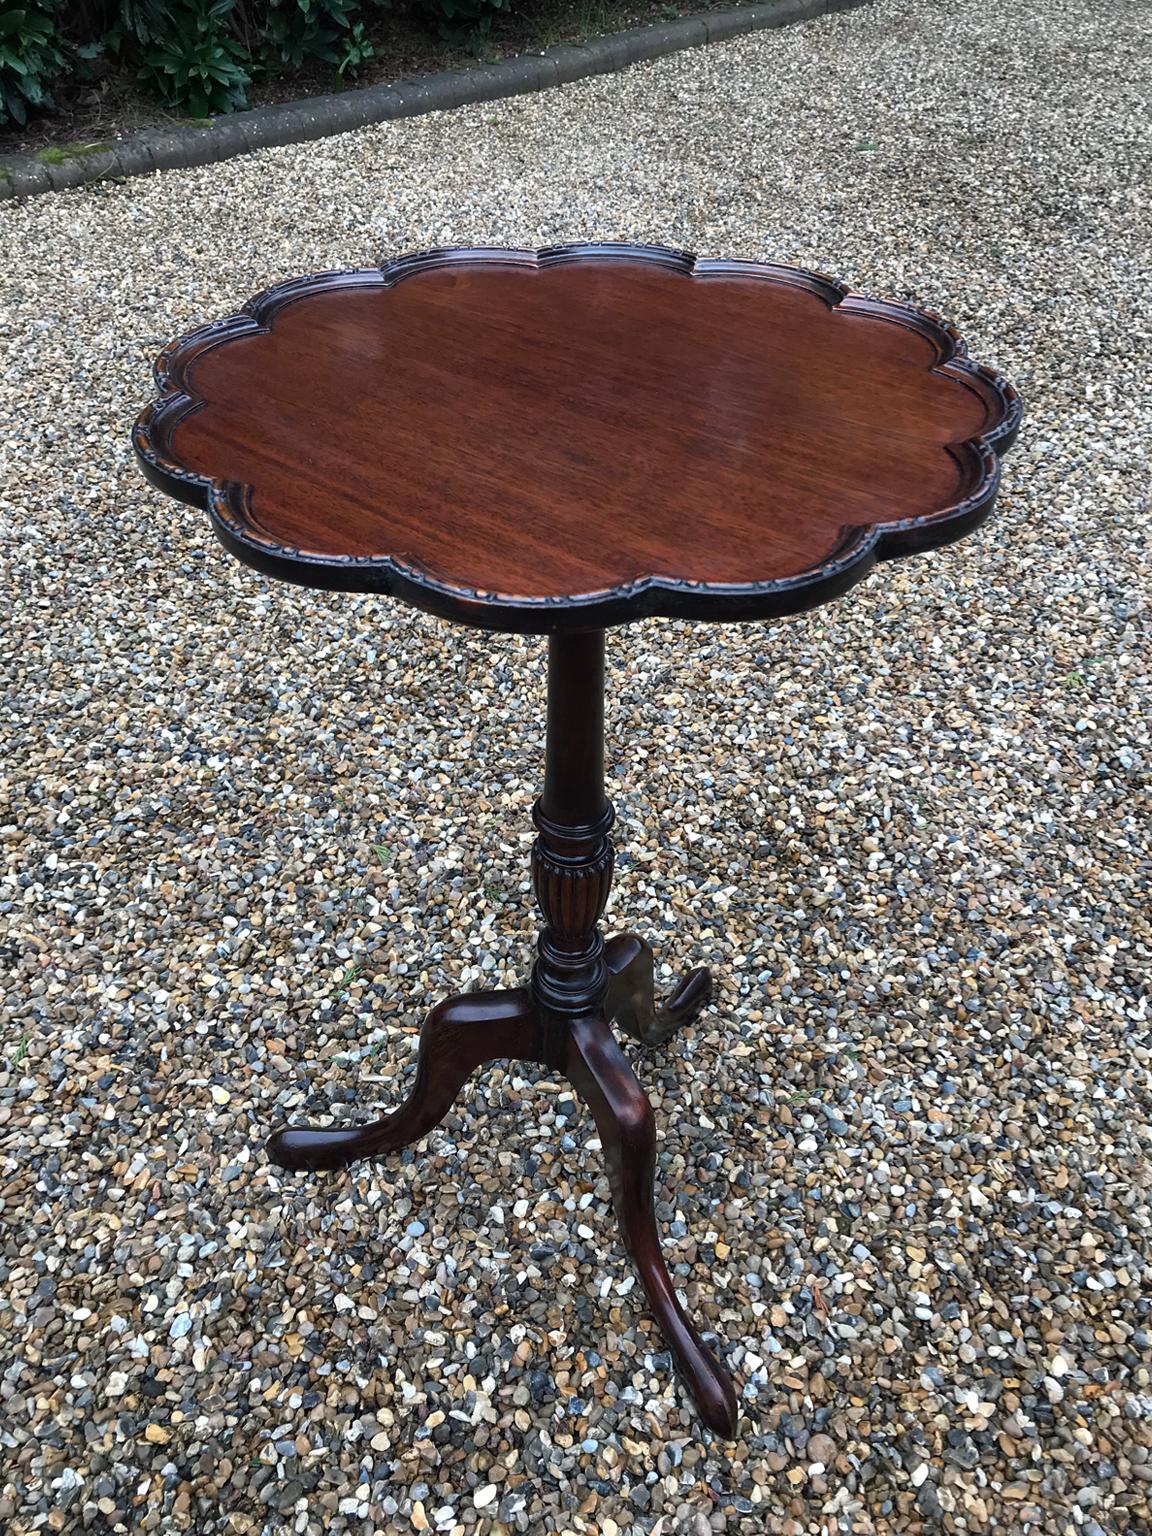 19th century mahogany wine table, with carved edging to top supported on a turned column with three splayed legs,

circa 1890

Dimensions:

Height: 25 inches - 71 cms
Diameter: 18 inches - 45 cms.